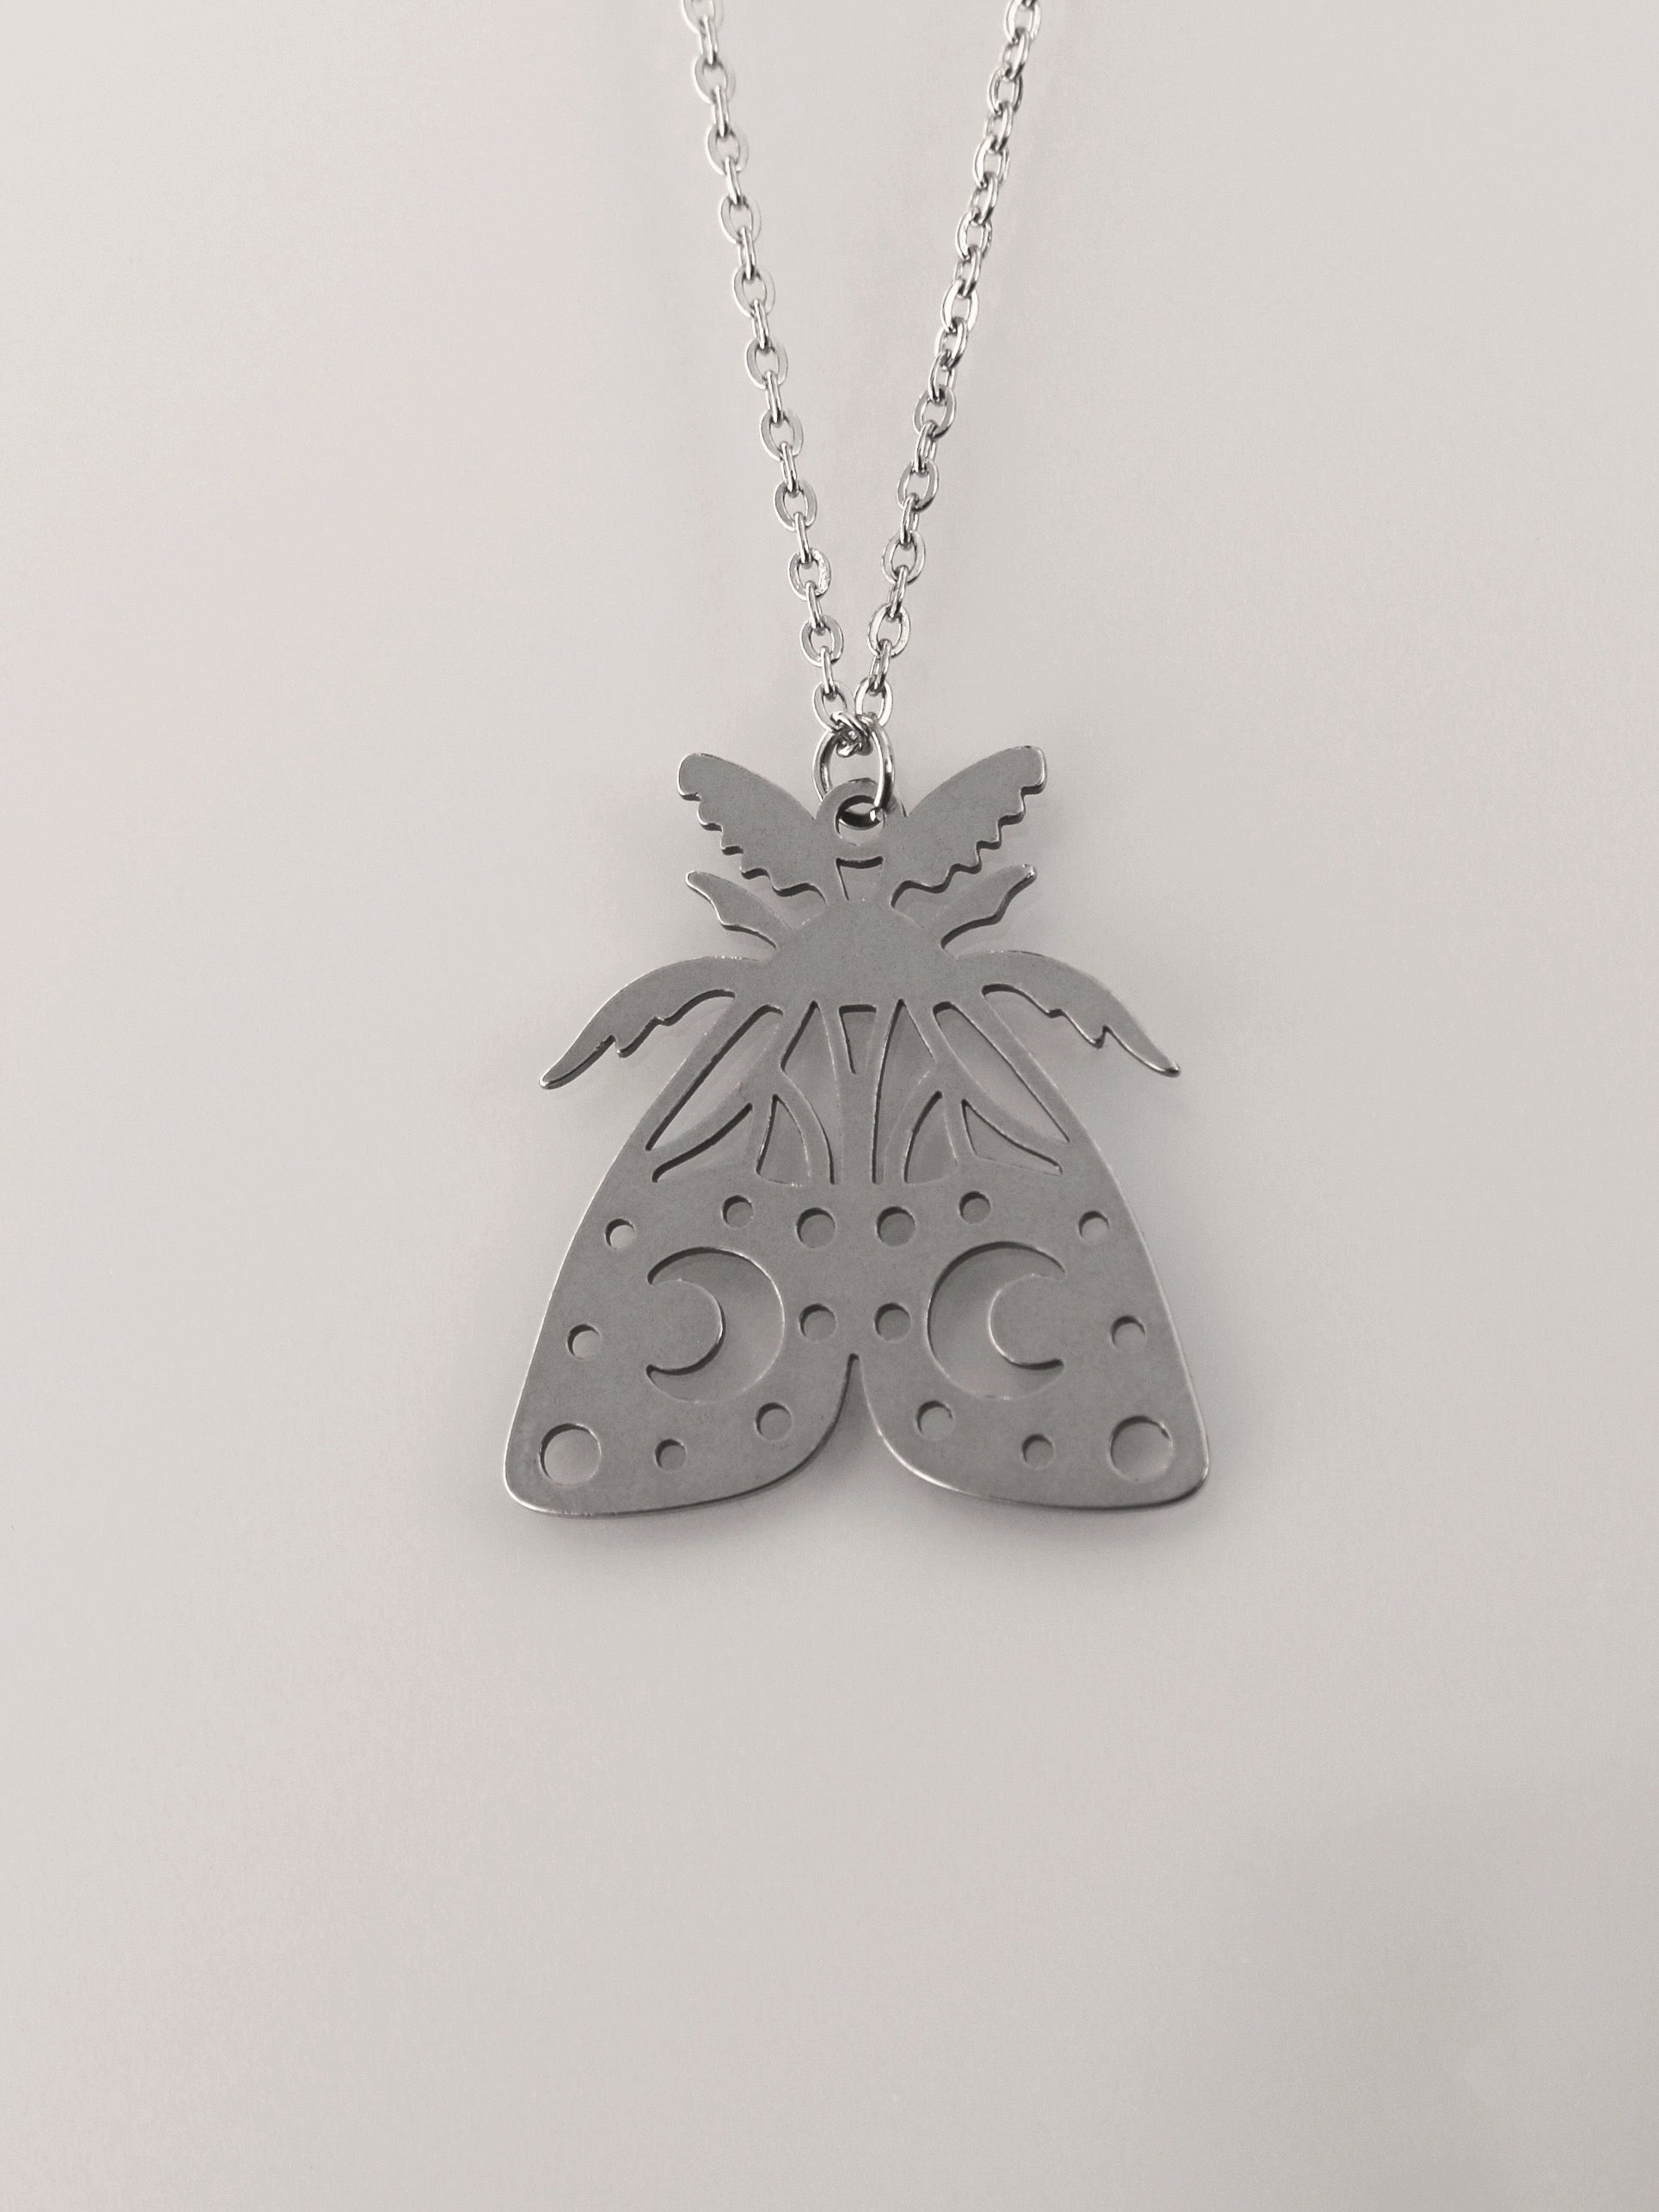 Feathered Luna Moth Necklace